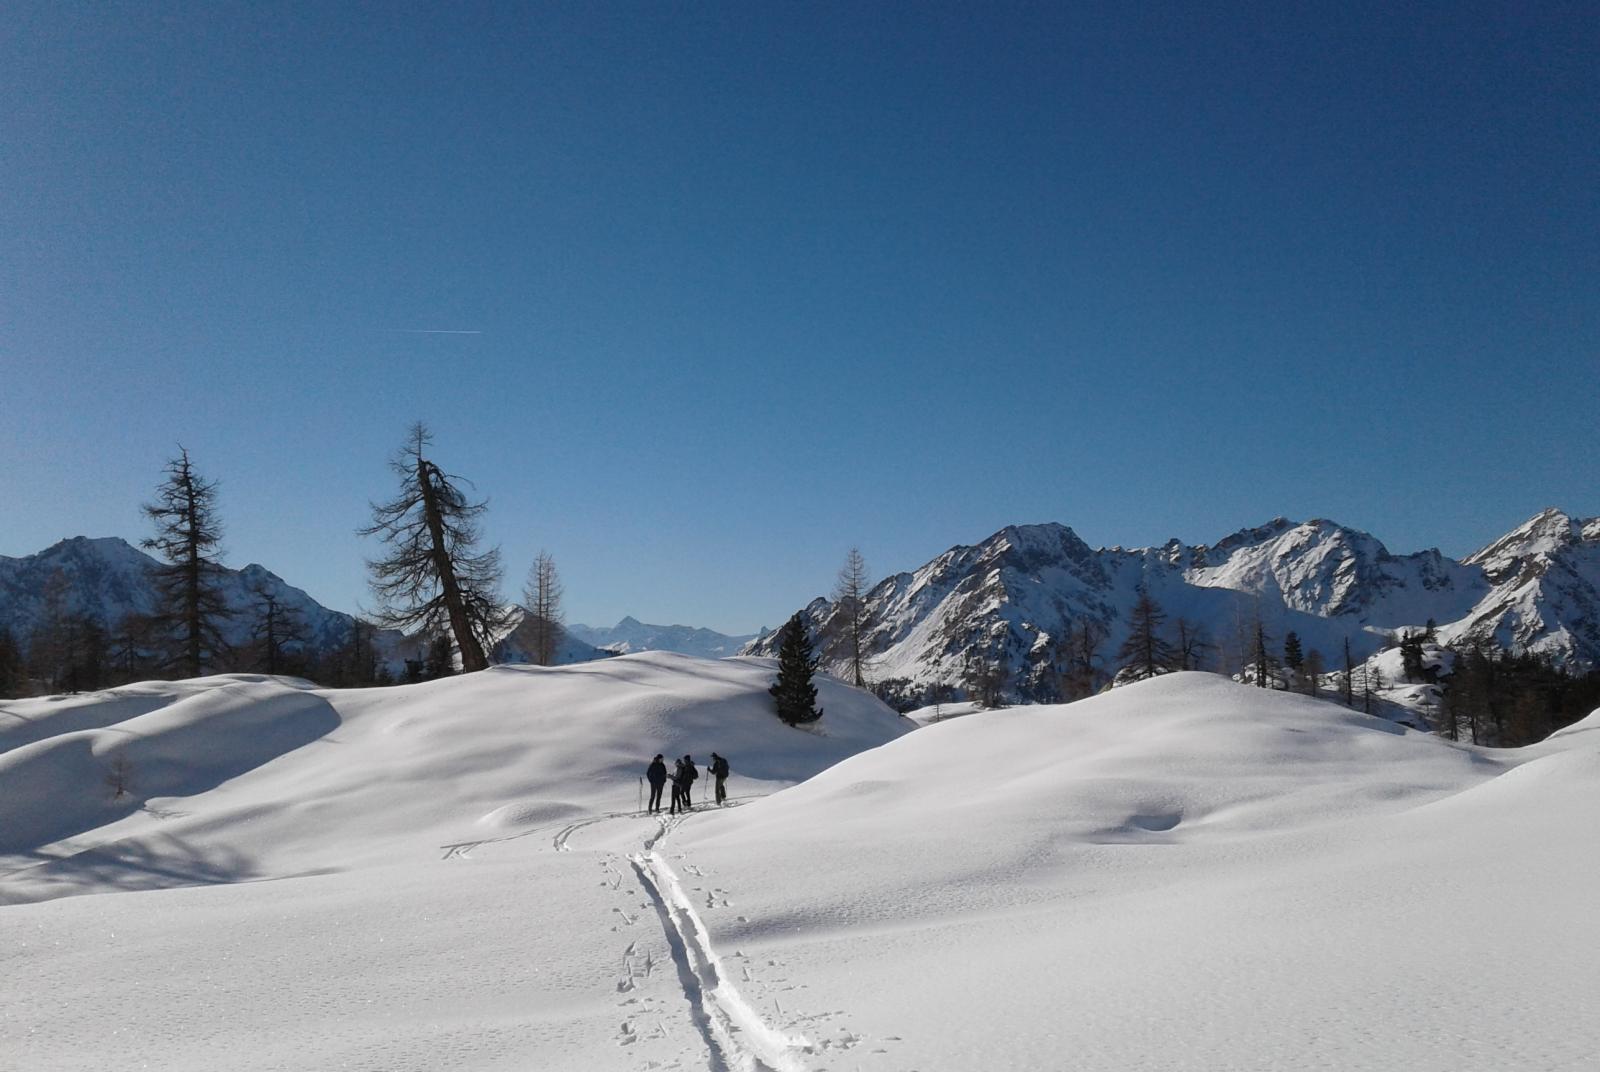 ONE DAY SKI TOURING WITH THE GRESSONEY GUIDE COMPANY